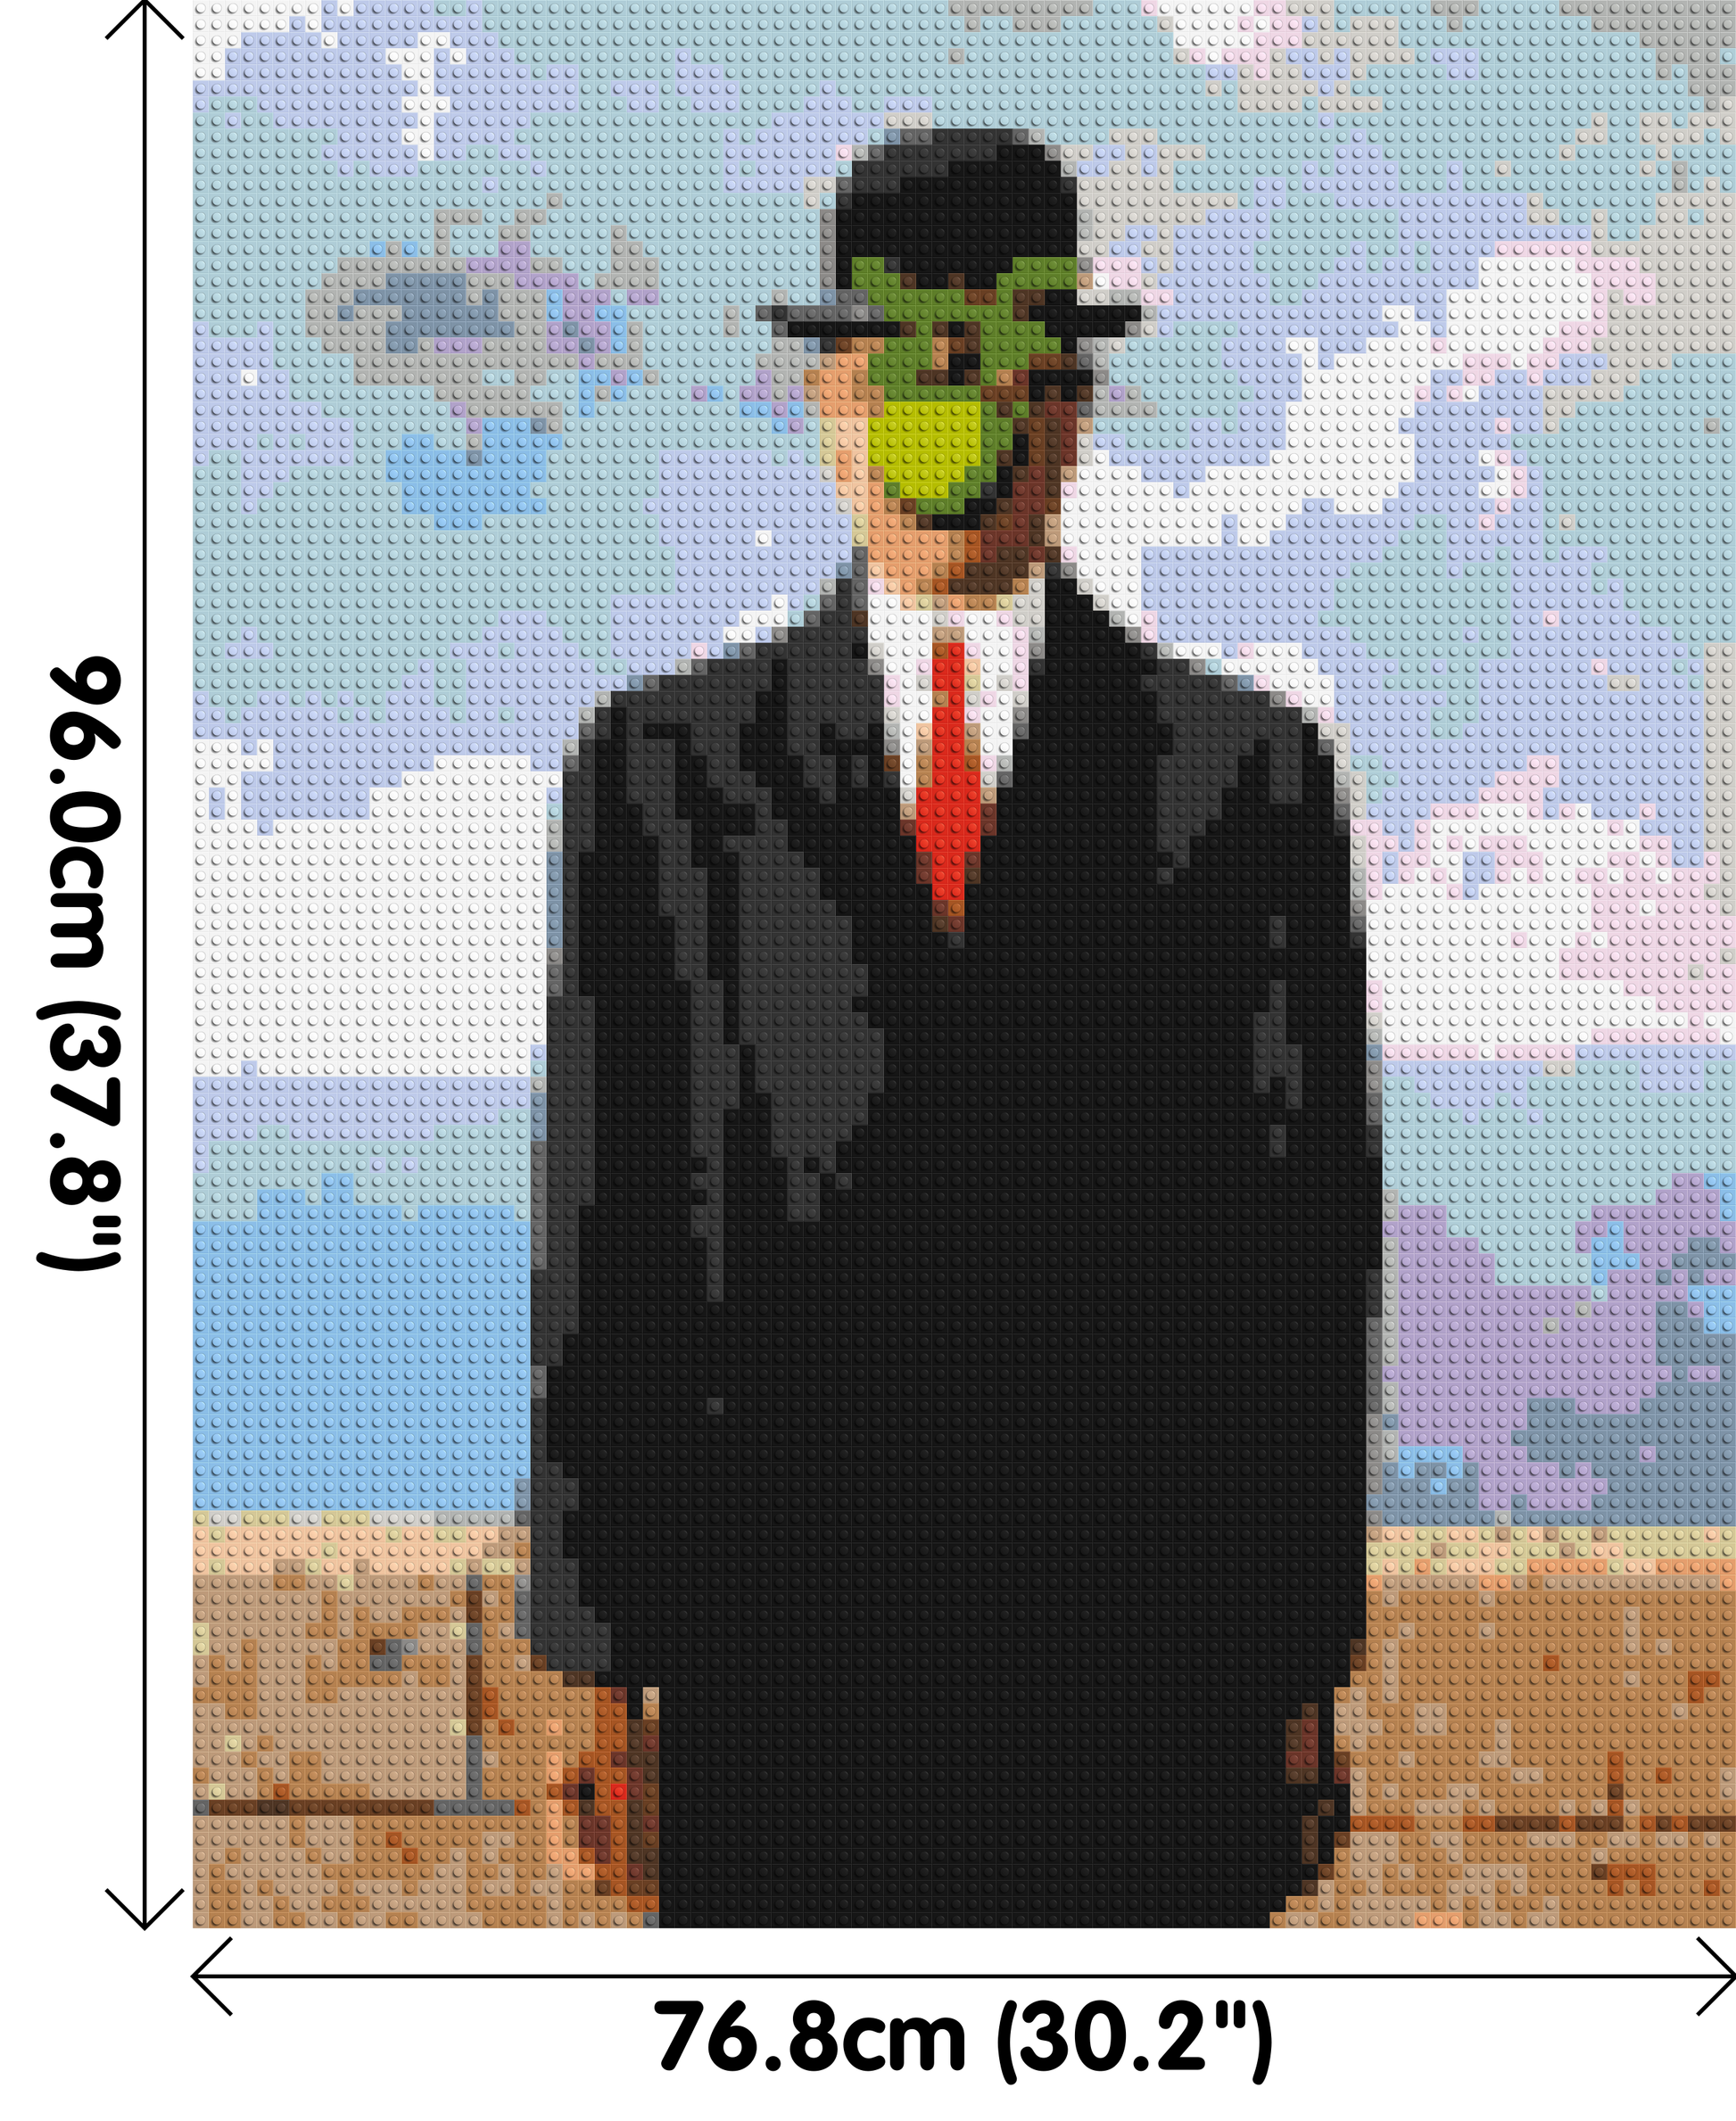 The Son of Man by René Magritte - Brick Art Mosaic Kit 4x5 dimensions